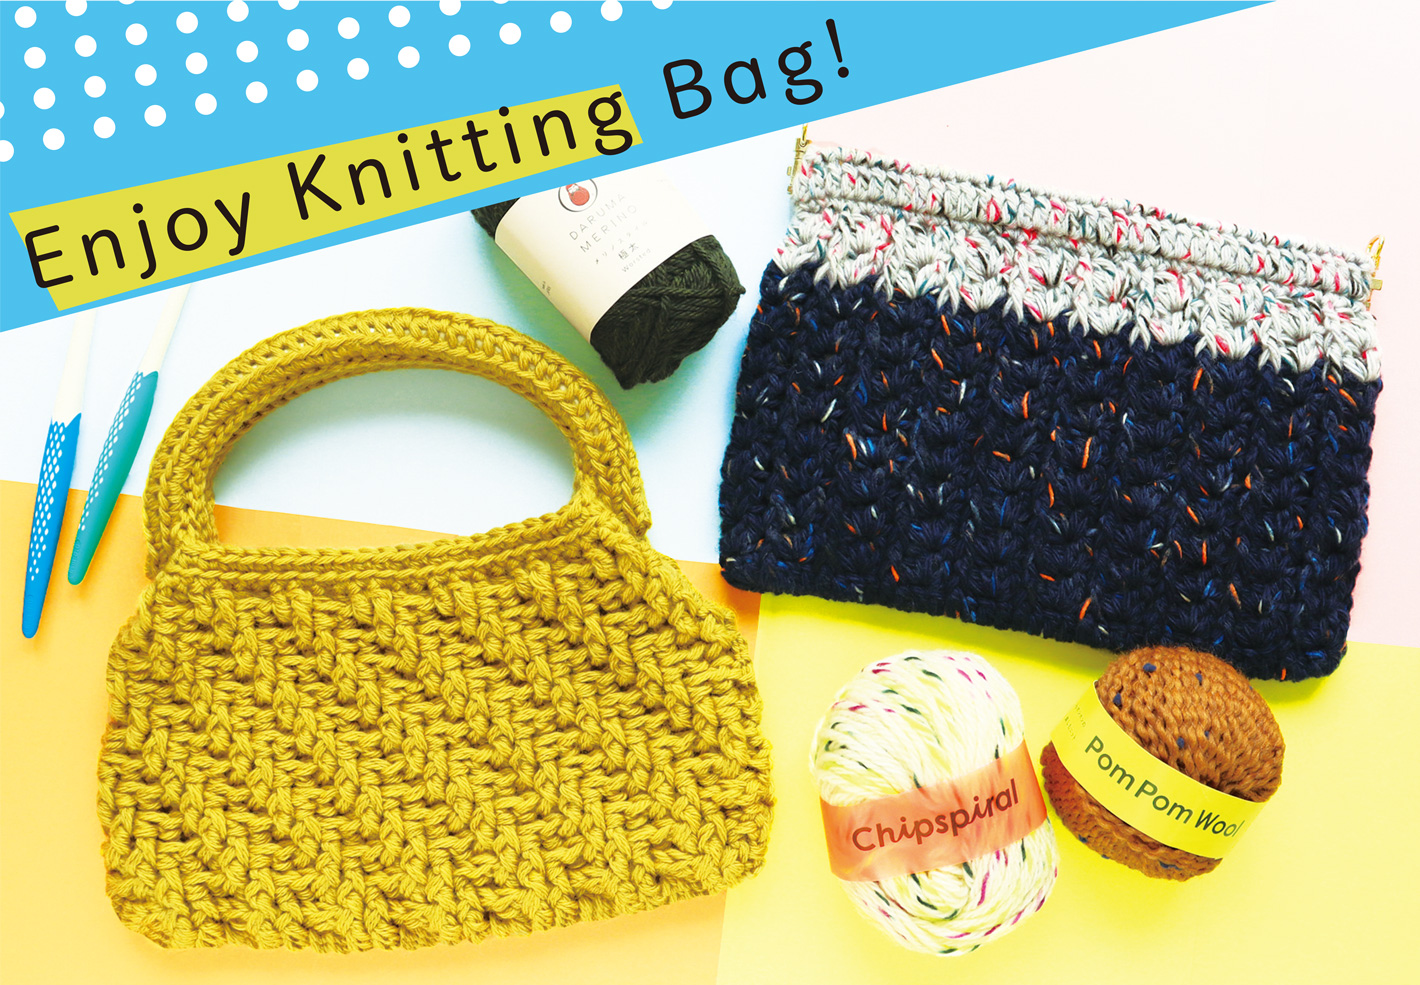 Let's make a knitted bag